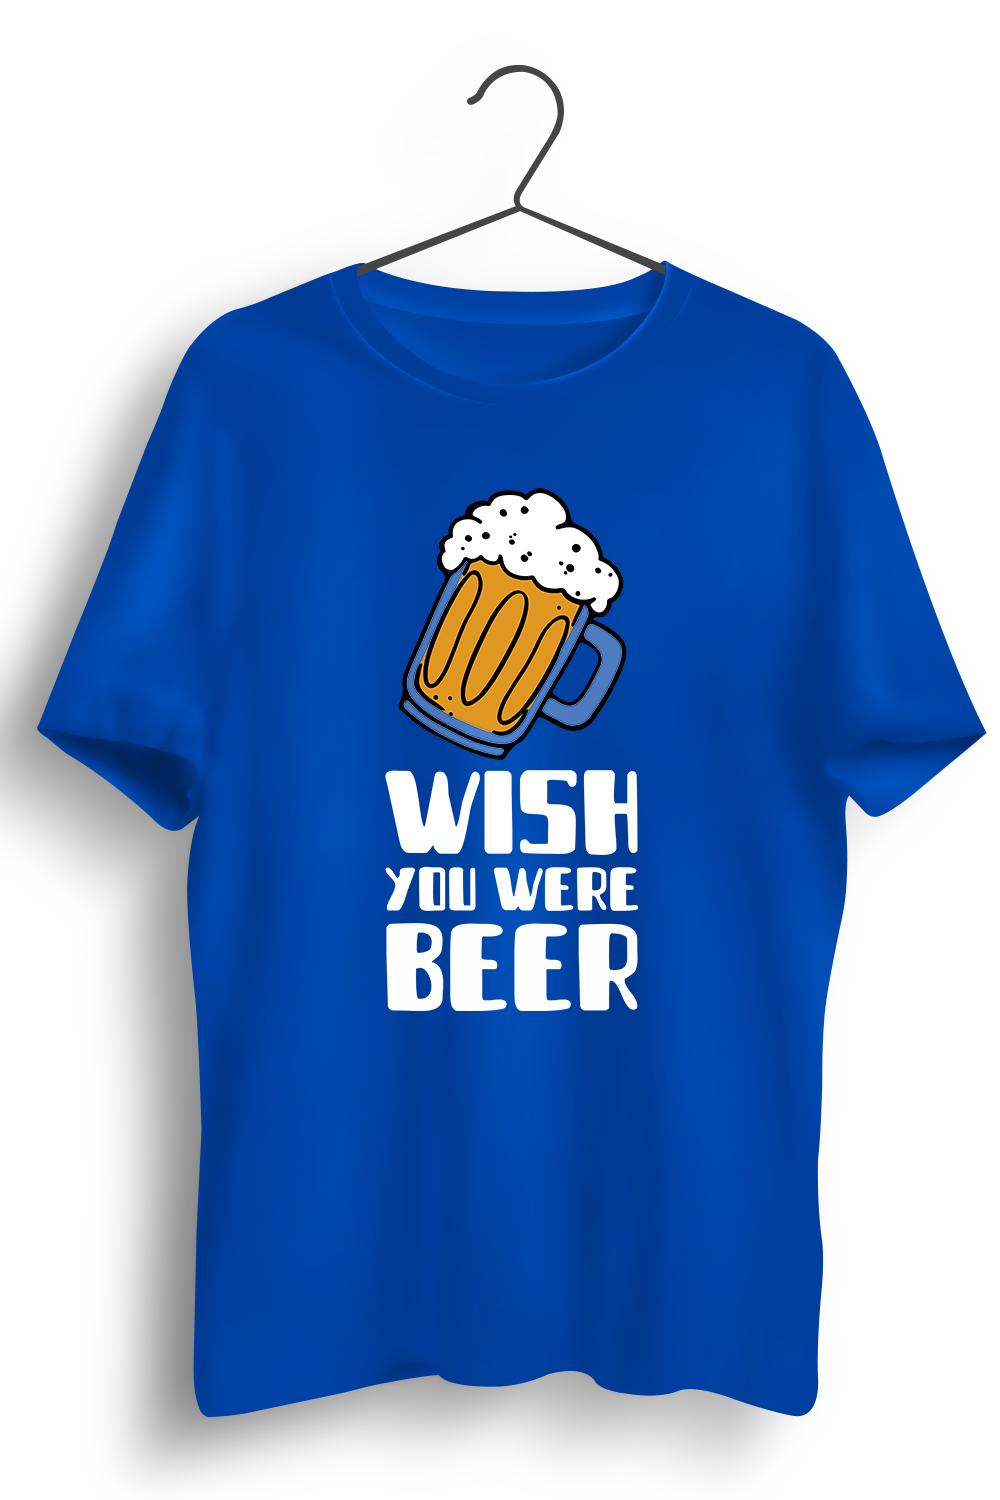 Wish You Were Beer Graphic Printed Blue Tshirt